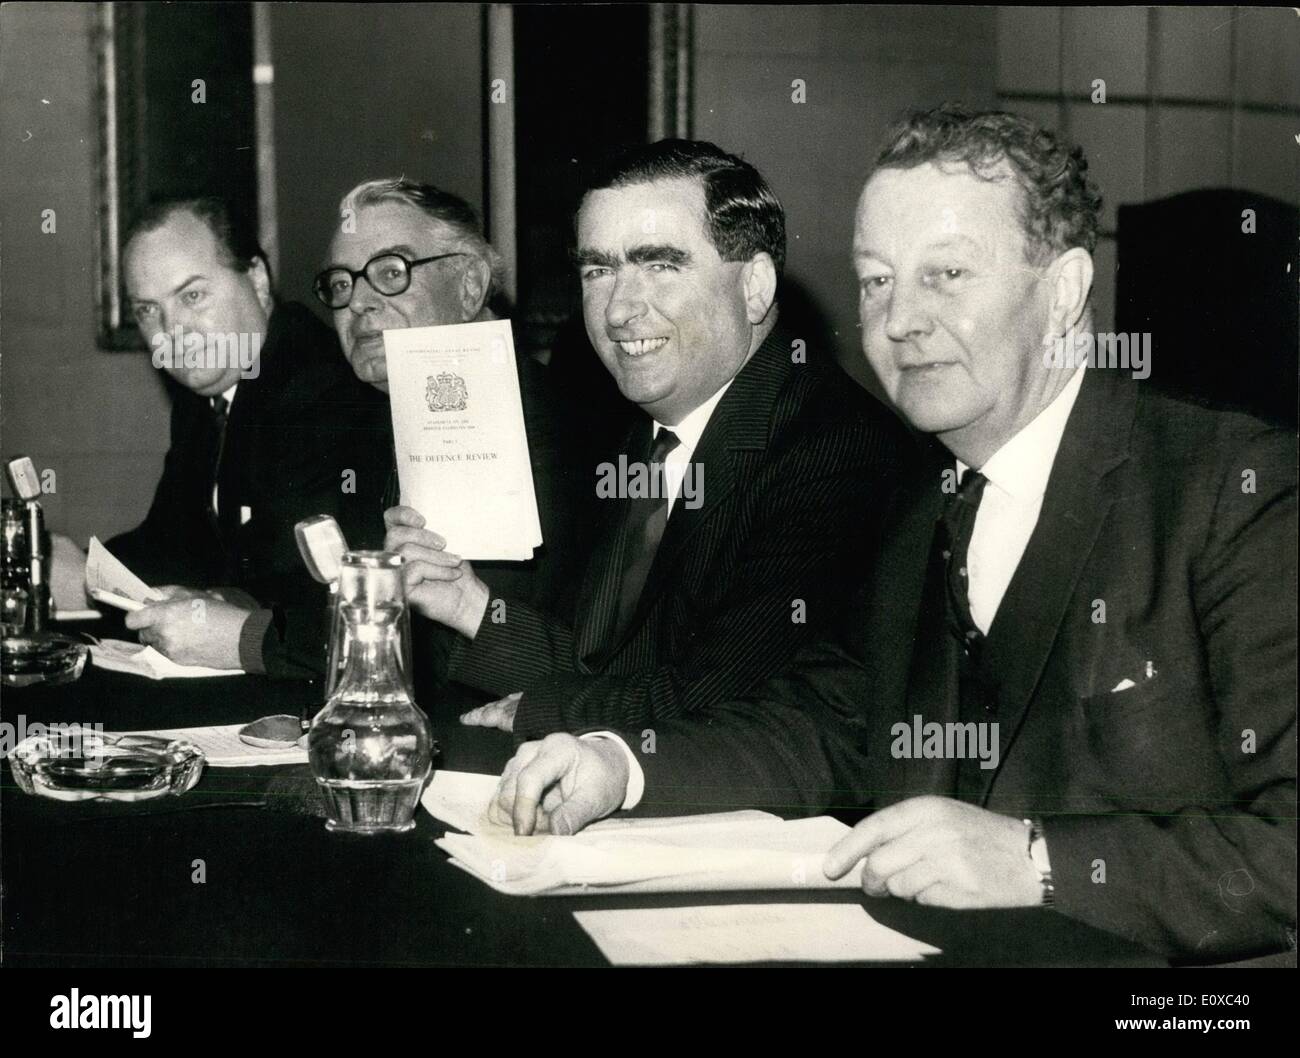 Feb. 02, 1966 - Press Conference on Defence White Paper: A Press Conference was held at the Defence Ministry this morning - when Mr. Denis Healey, the Defence Minister discussed the White Paper of Defence, which comes out today. Photo shows Pictured at the Press Conference today are (L to R): Minister of Defence Army: Mr. Jerry Reynolds; Minister of Defence, R.A.F. Lord Shackleton, Mr. Denis Healey, the Defence Minister and the Navy Minister, Mr. Mallalieu. Stock Photo